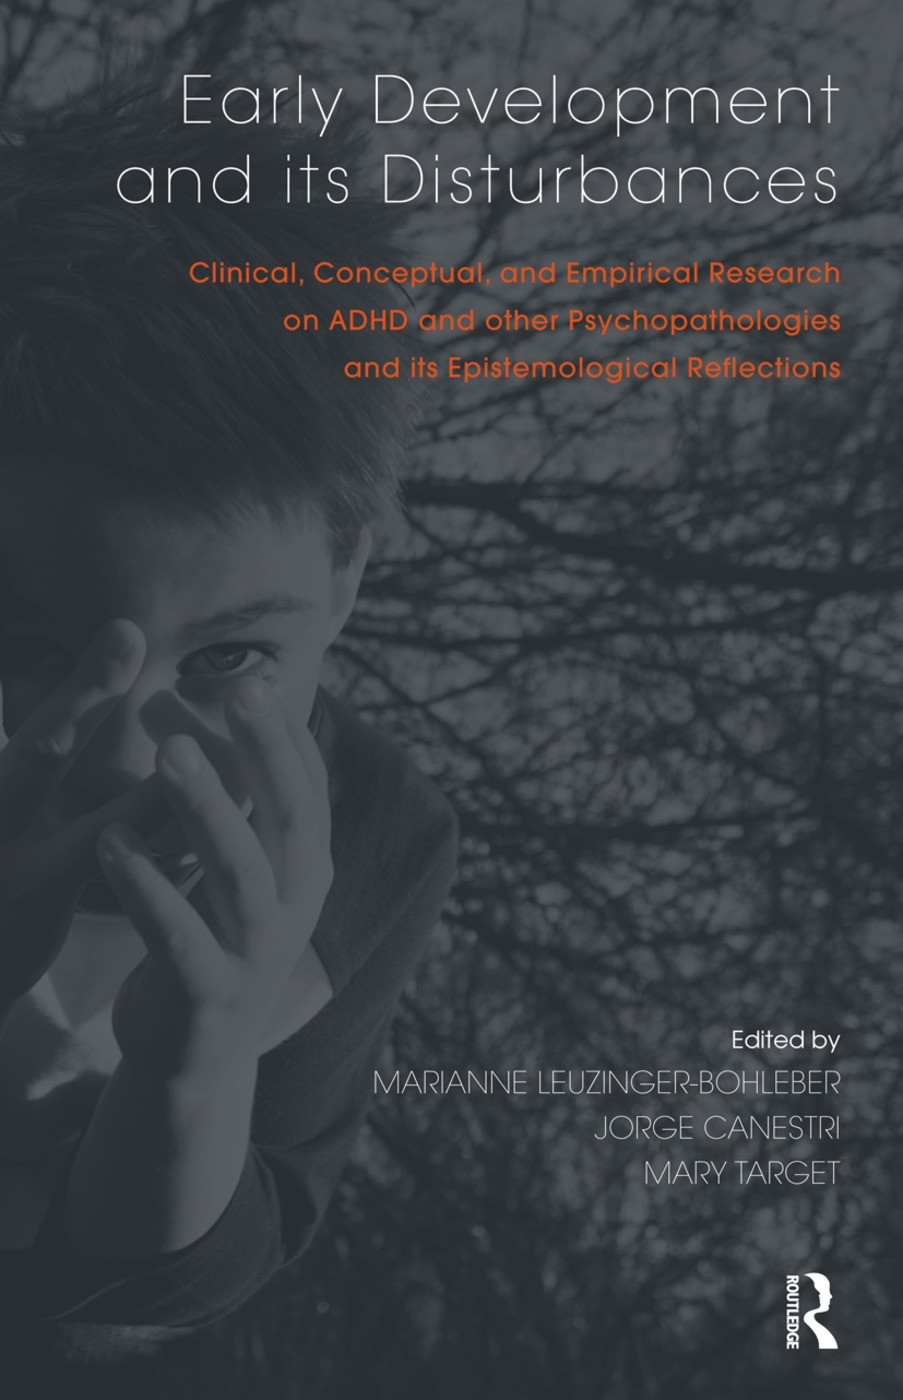 Early Development and Its Disturbances: Clinical, Conceptual, and Empirical Research on ADHD and Other Psychopathologies and Its